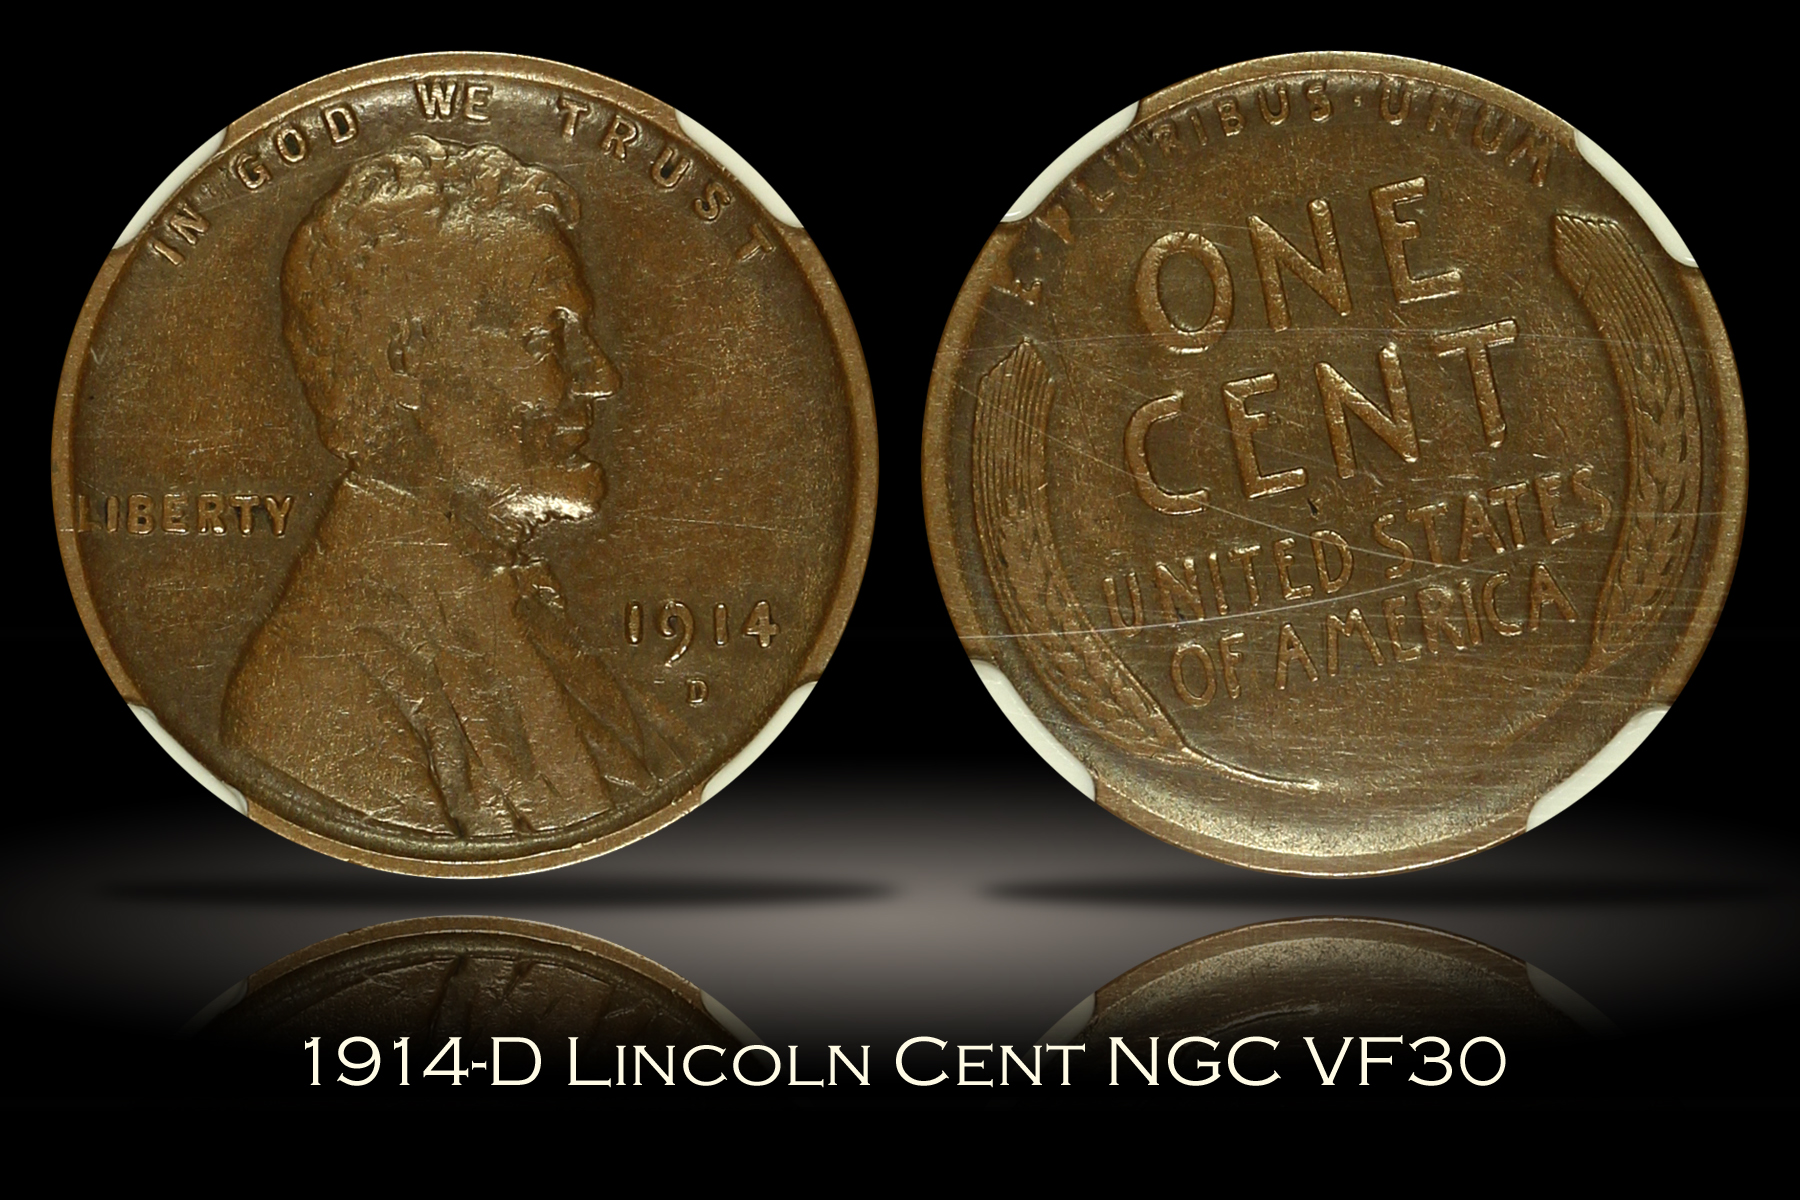 1914-D Lincoln Cent NGC VF30